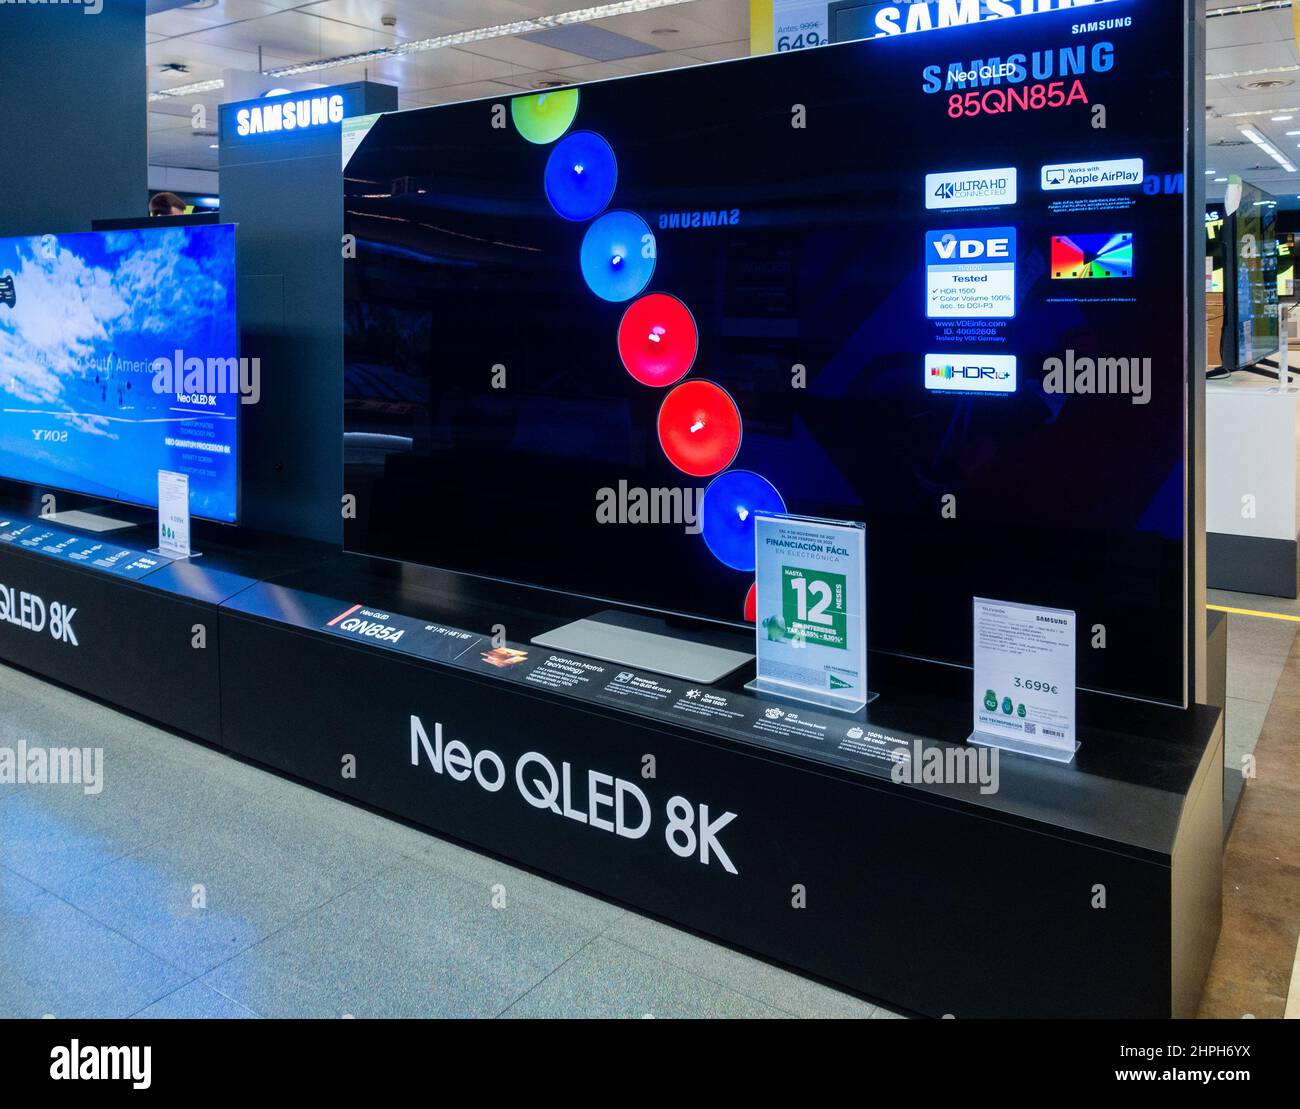 Samsung High definition Neo QLED 8K television, TV screen in store. Stock Photo